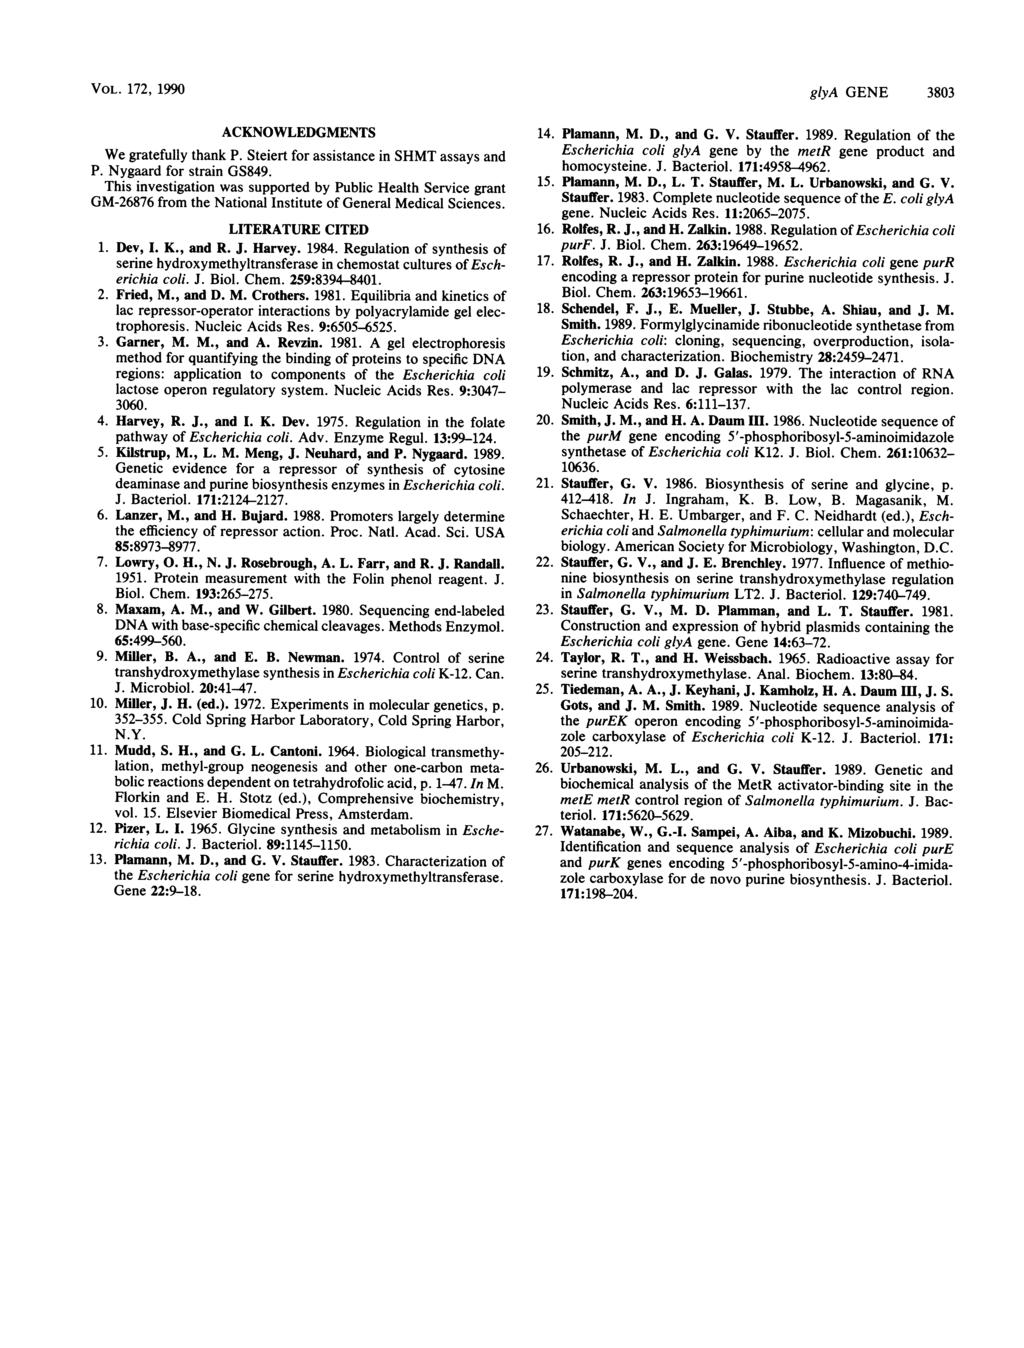 VOL. 172, 1990 ACKNOWLEDGMENTS We gratefully thank P. Steiert for assistance in SHMT assays and P. Nygaard for strain GS849.